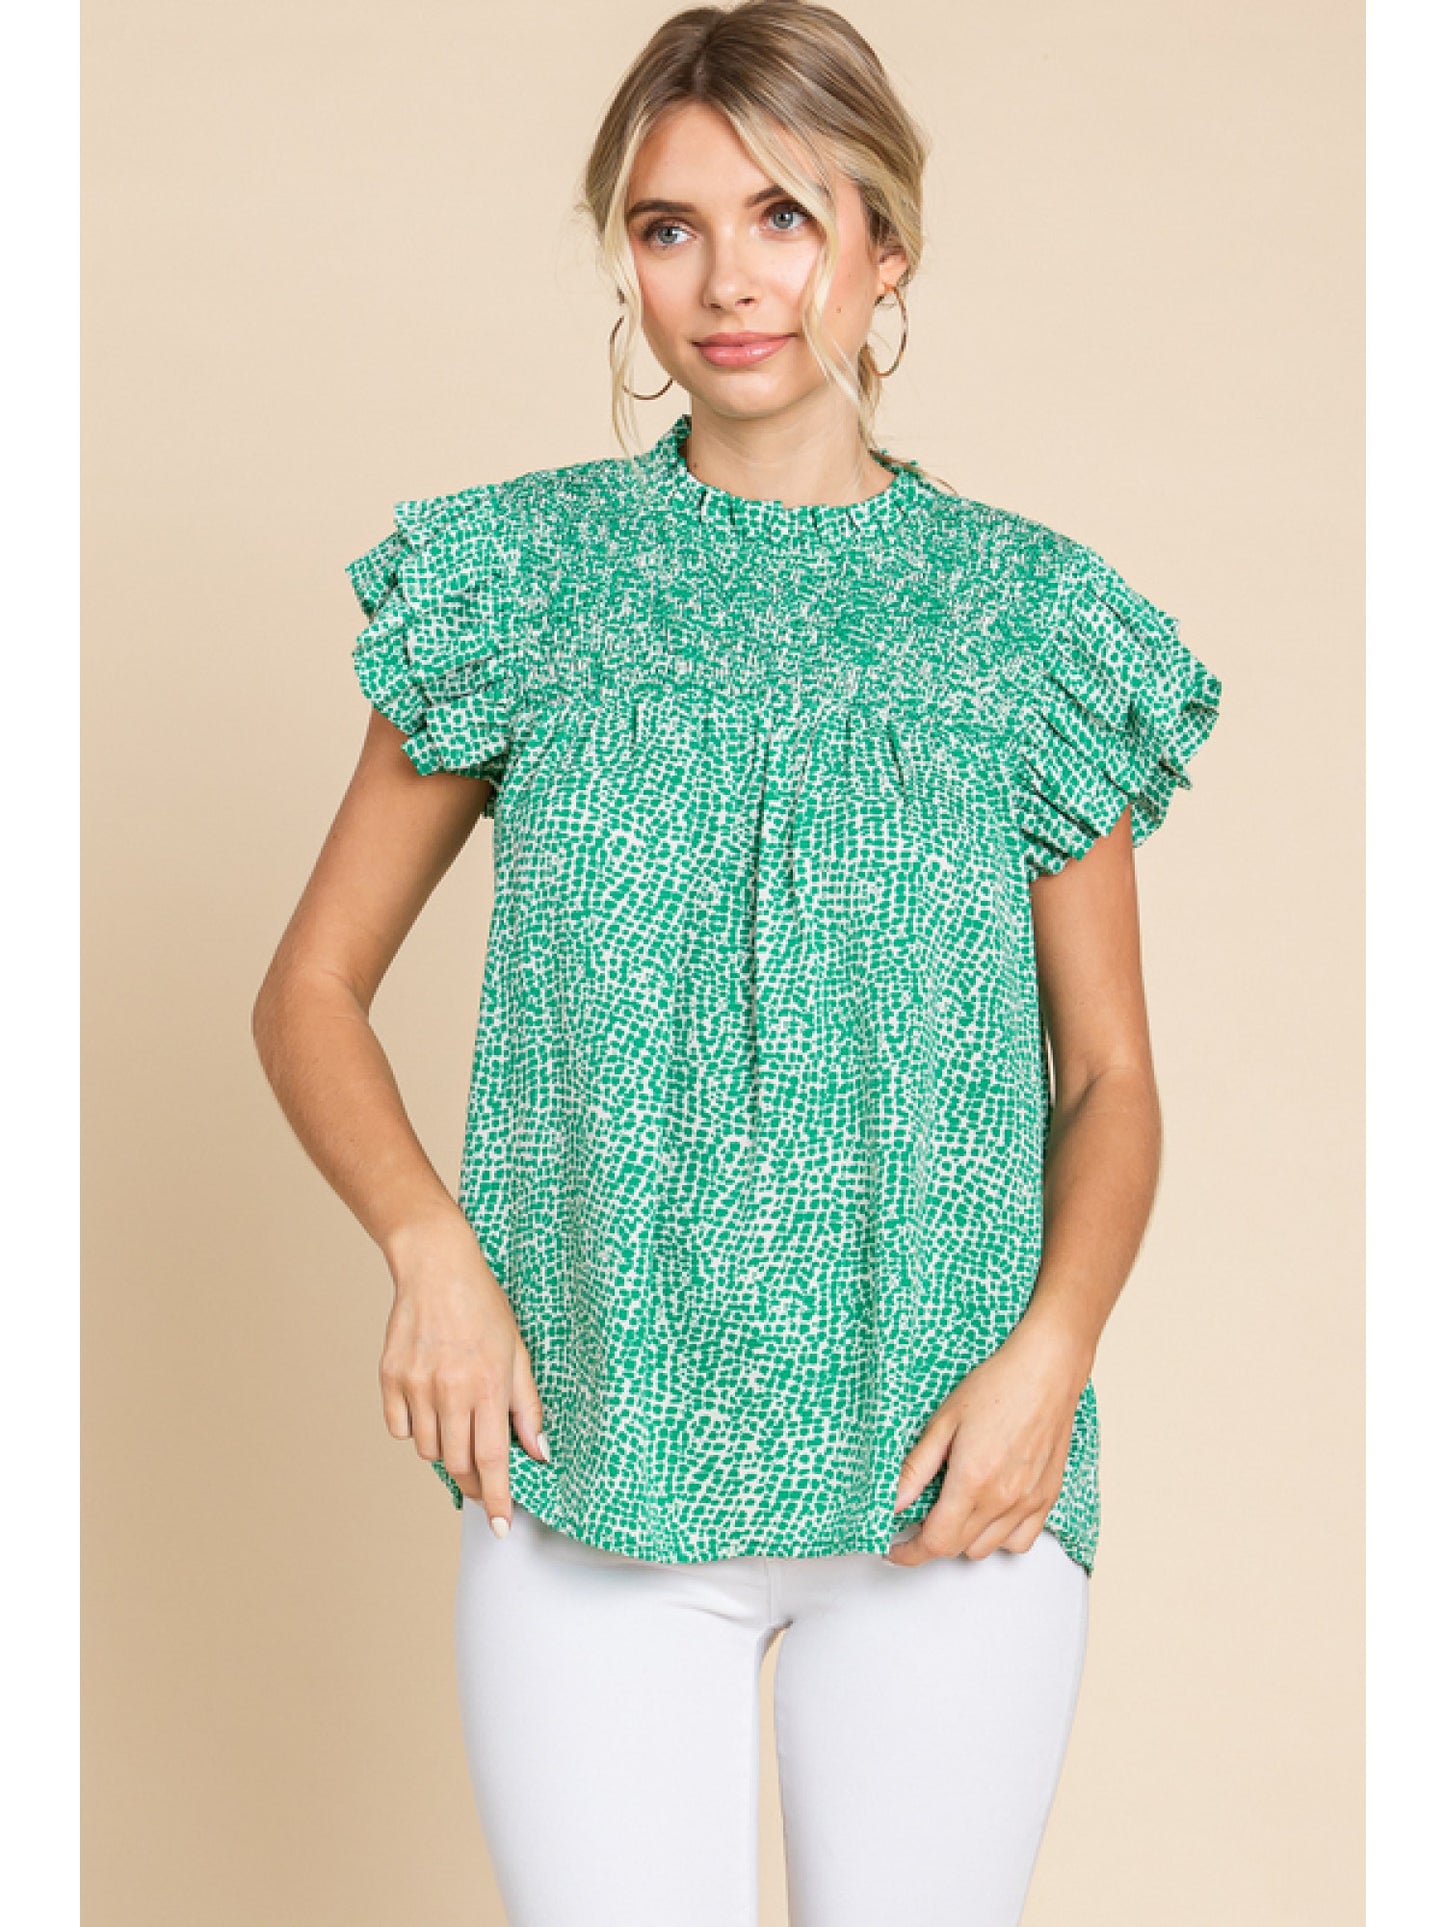 Crazy about the Frilled Top